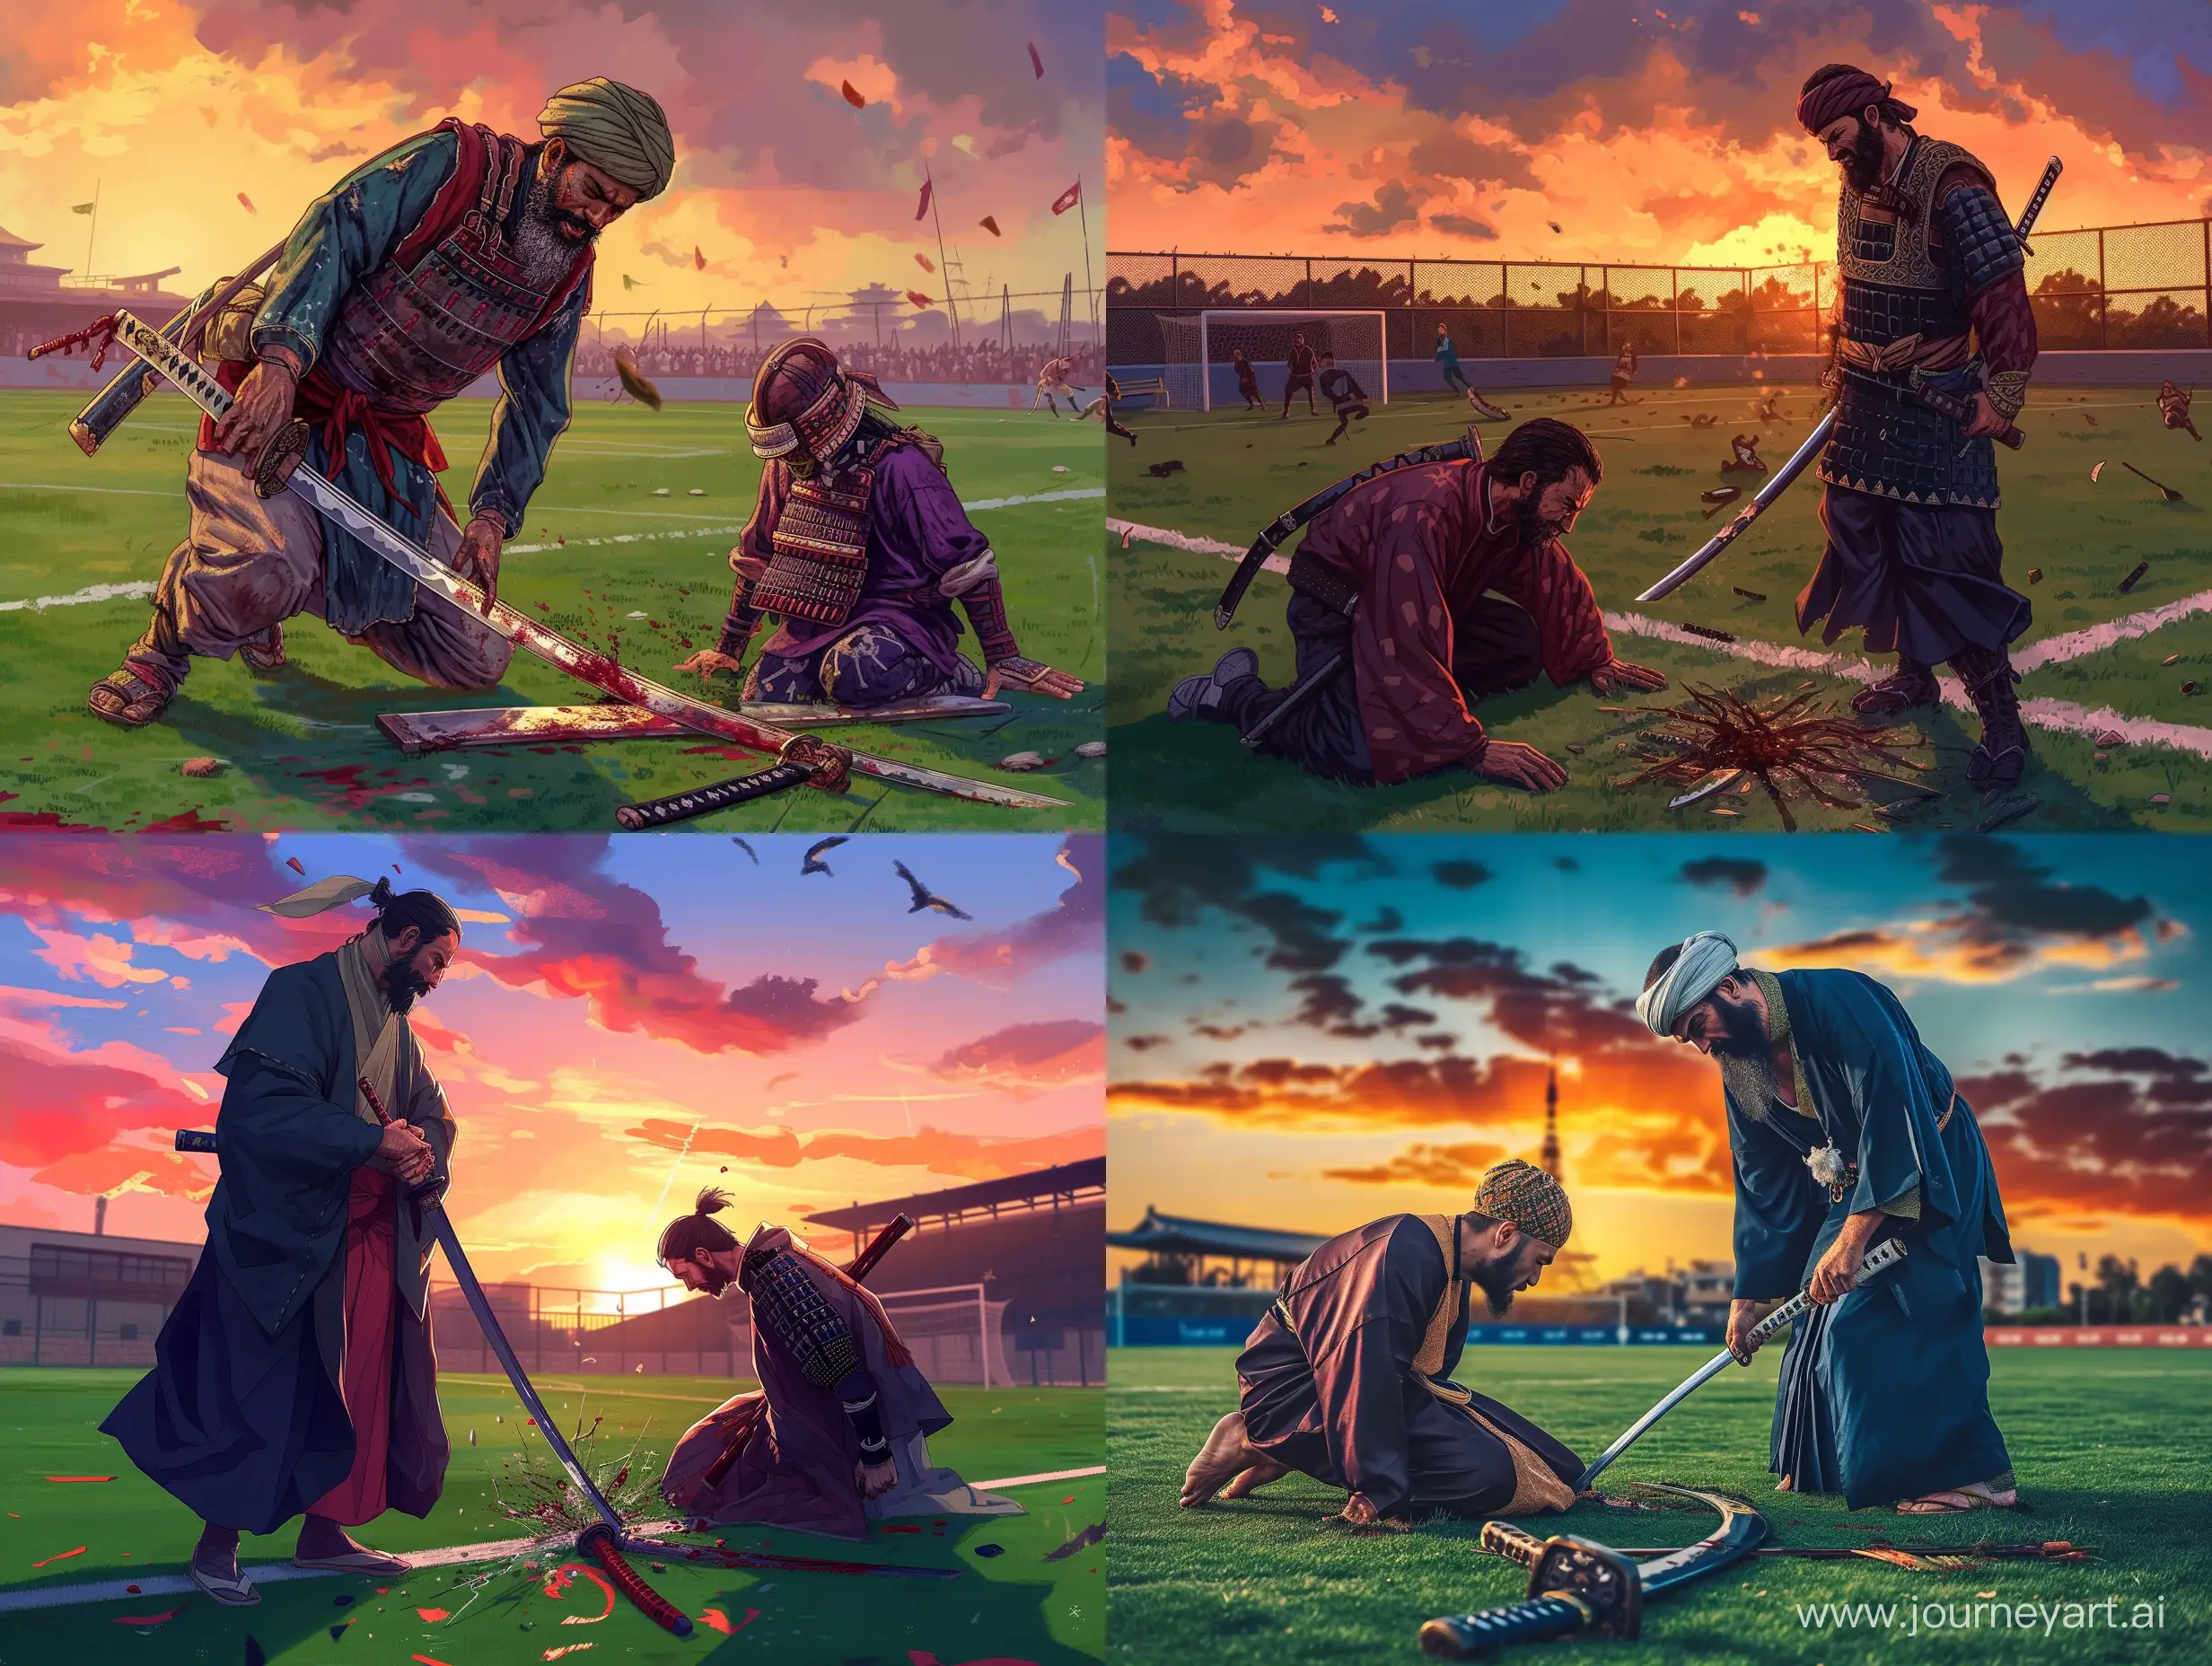 The Persian prince has his Persian sword under the throat of the Japanese samurai, and the samurai is on his knees in despair.  A broken samurai sword is on the ground, the place is a soccer field and at sunset